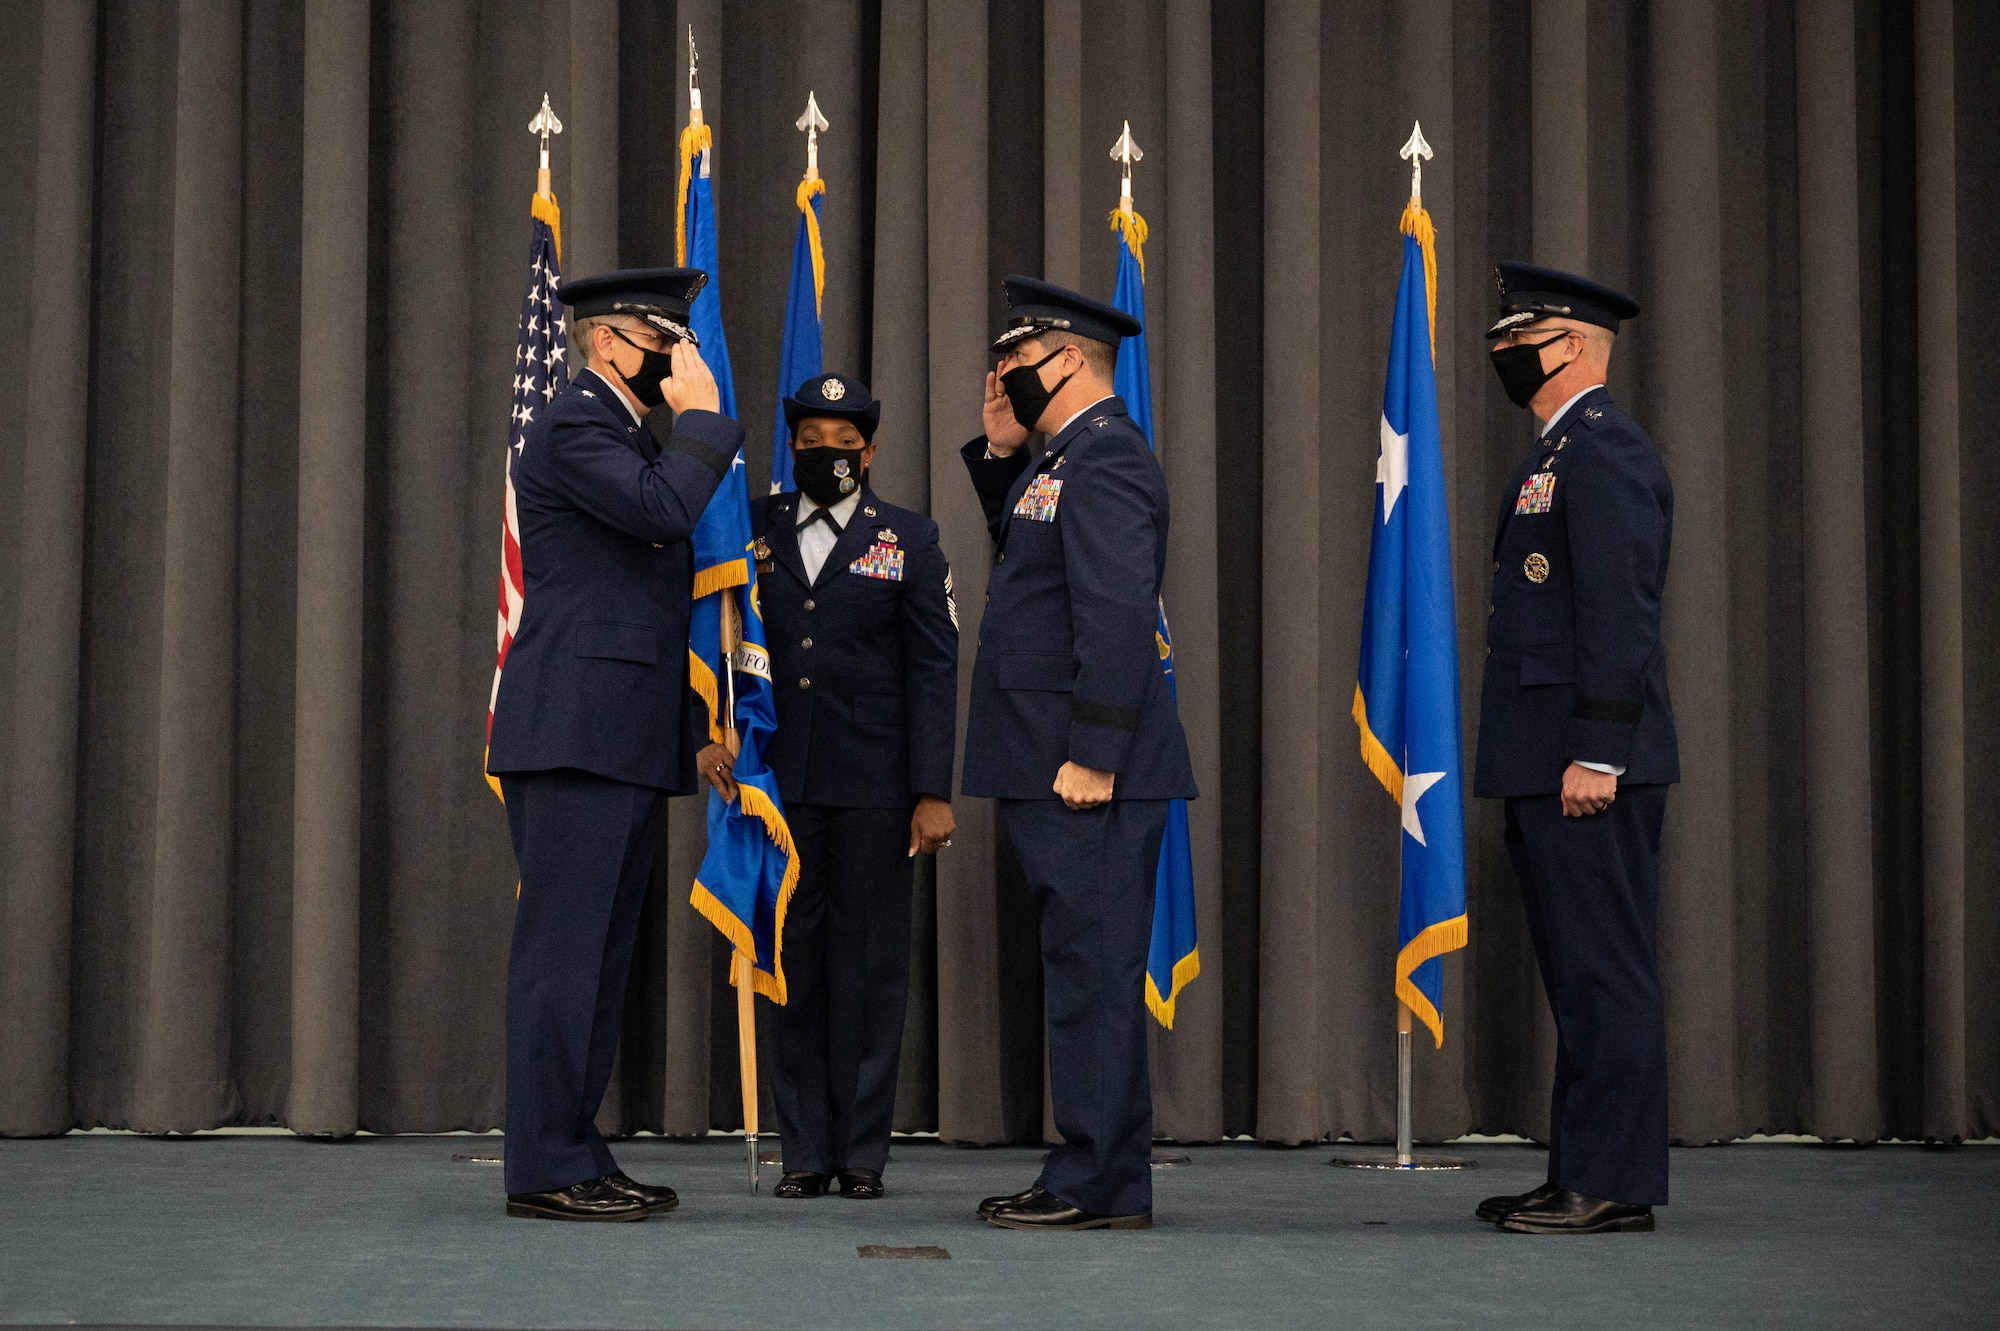 Maj. Gen. Andrew Gebara, center, incoming 8th Air Force and Joint-Global Strike Operations Center commander, renders a salute to Gen. Tim Ray, left, commander of Air Force Global Strike Command, during a change of command ceremony at Barksdale Air Force Base, La., August 16, 2021. A change of command is a military tradition that represents a formal transfer of authority and responsibility for a unit from one commanding or flag officer to another. (U.S. Air Force photo by Staff Sgt. Bria Hughes)